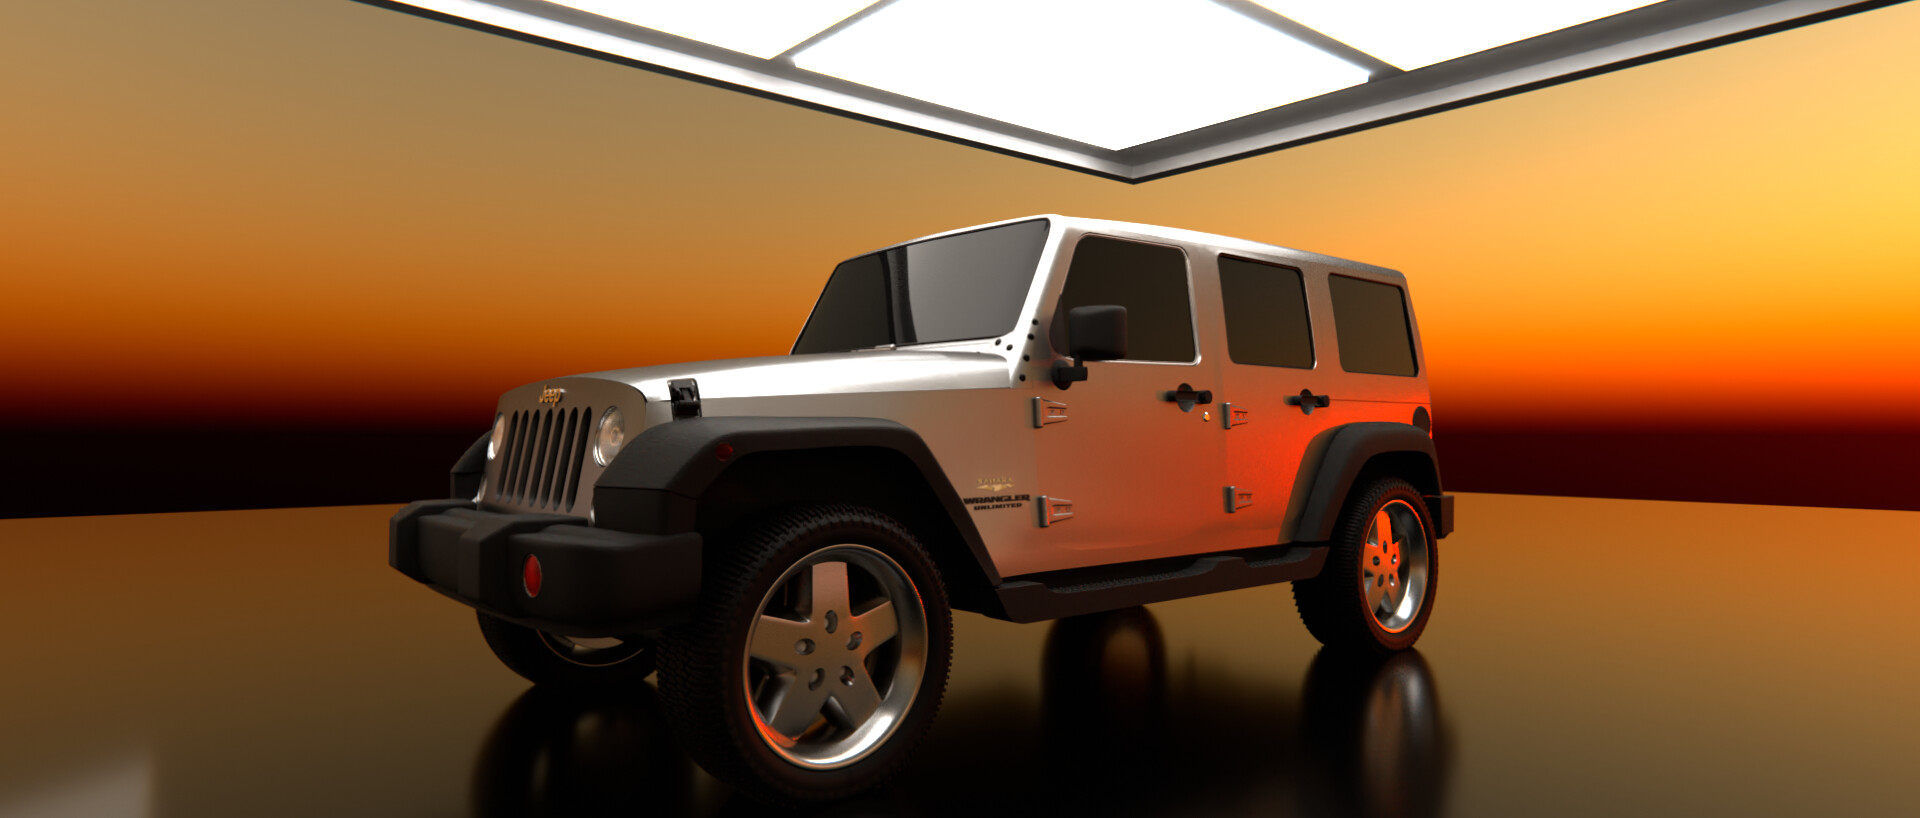 My first car project: Jeep Wrangler 2013 - Finished Projects - Blender  Artists Community